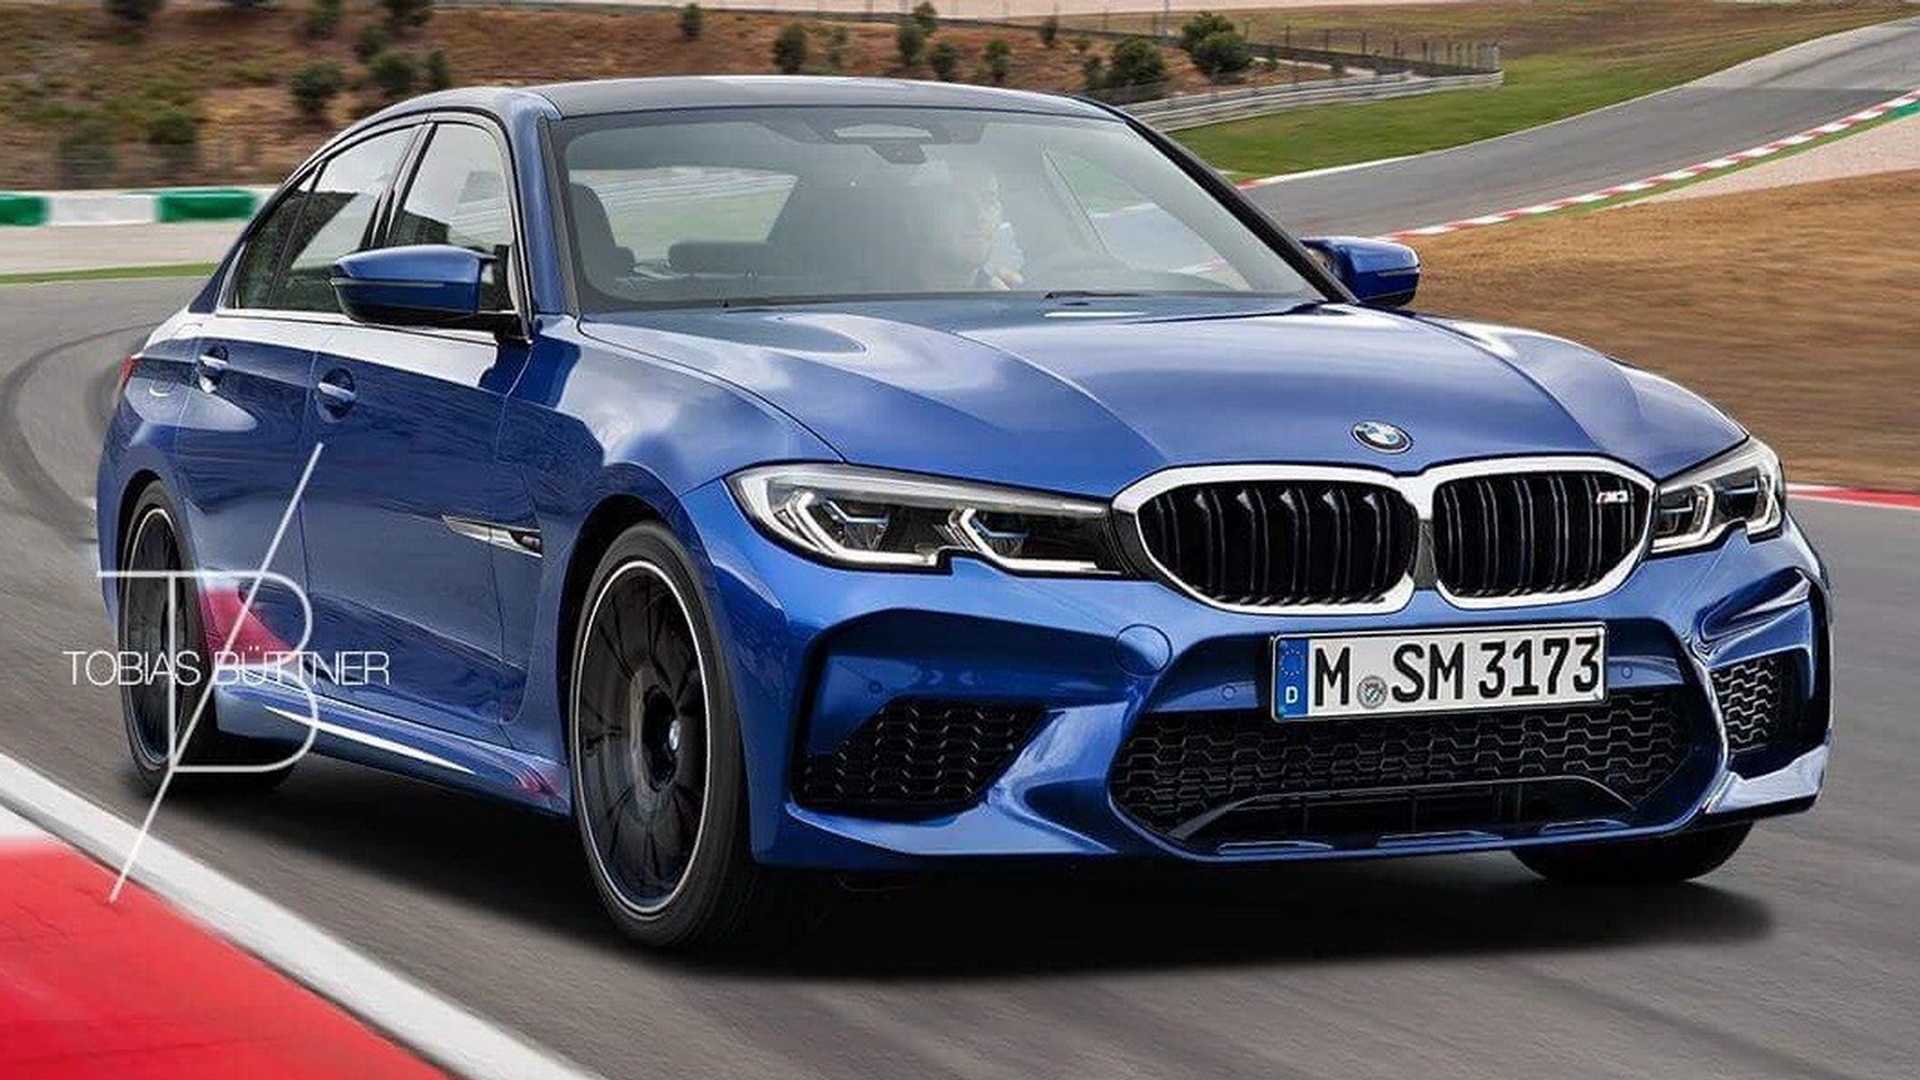 BMW M3 Pure Allegedly Planned With RWD, 6 Speed Manual